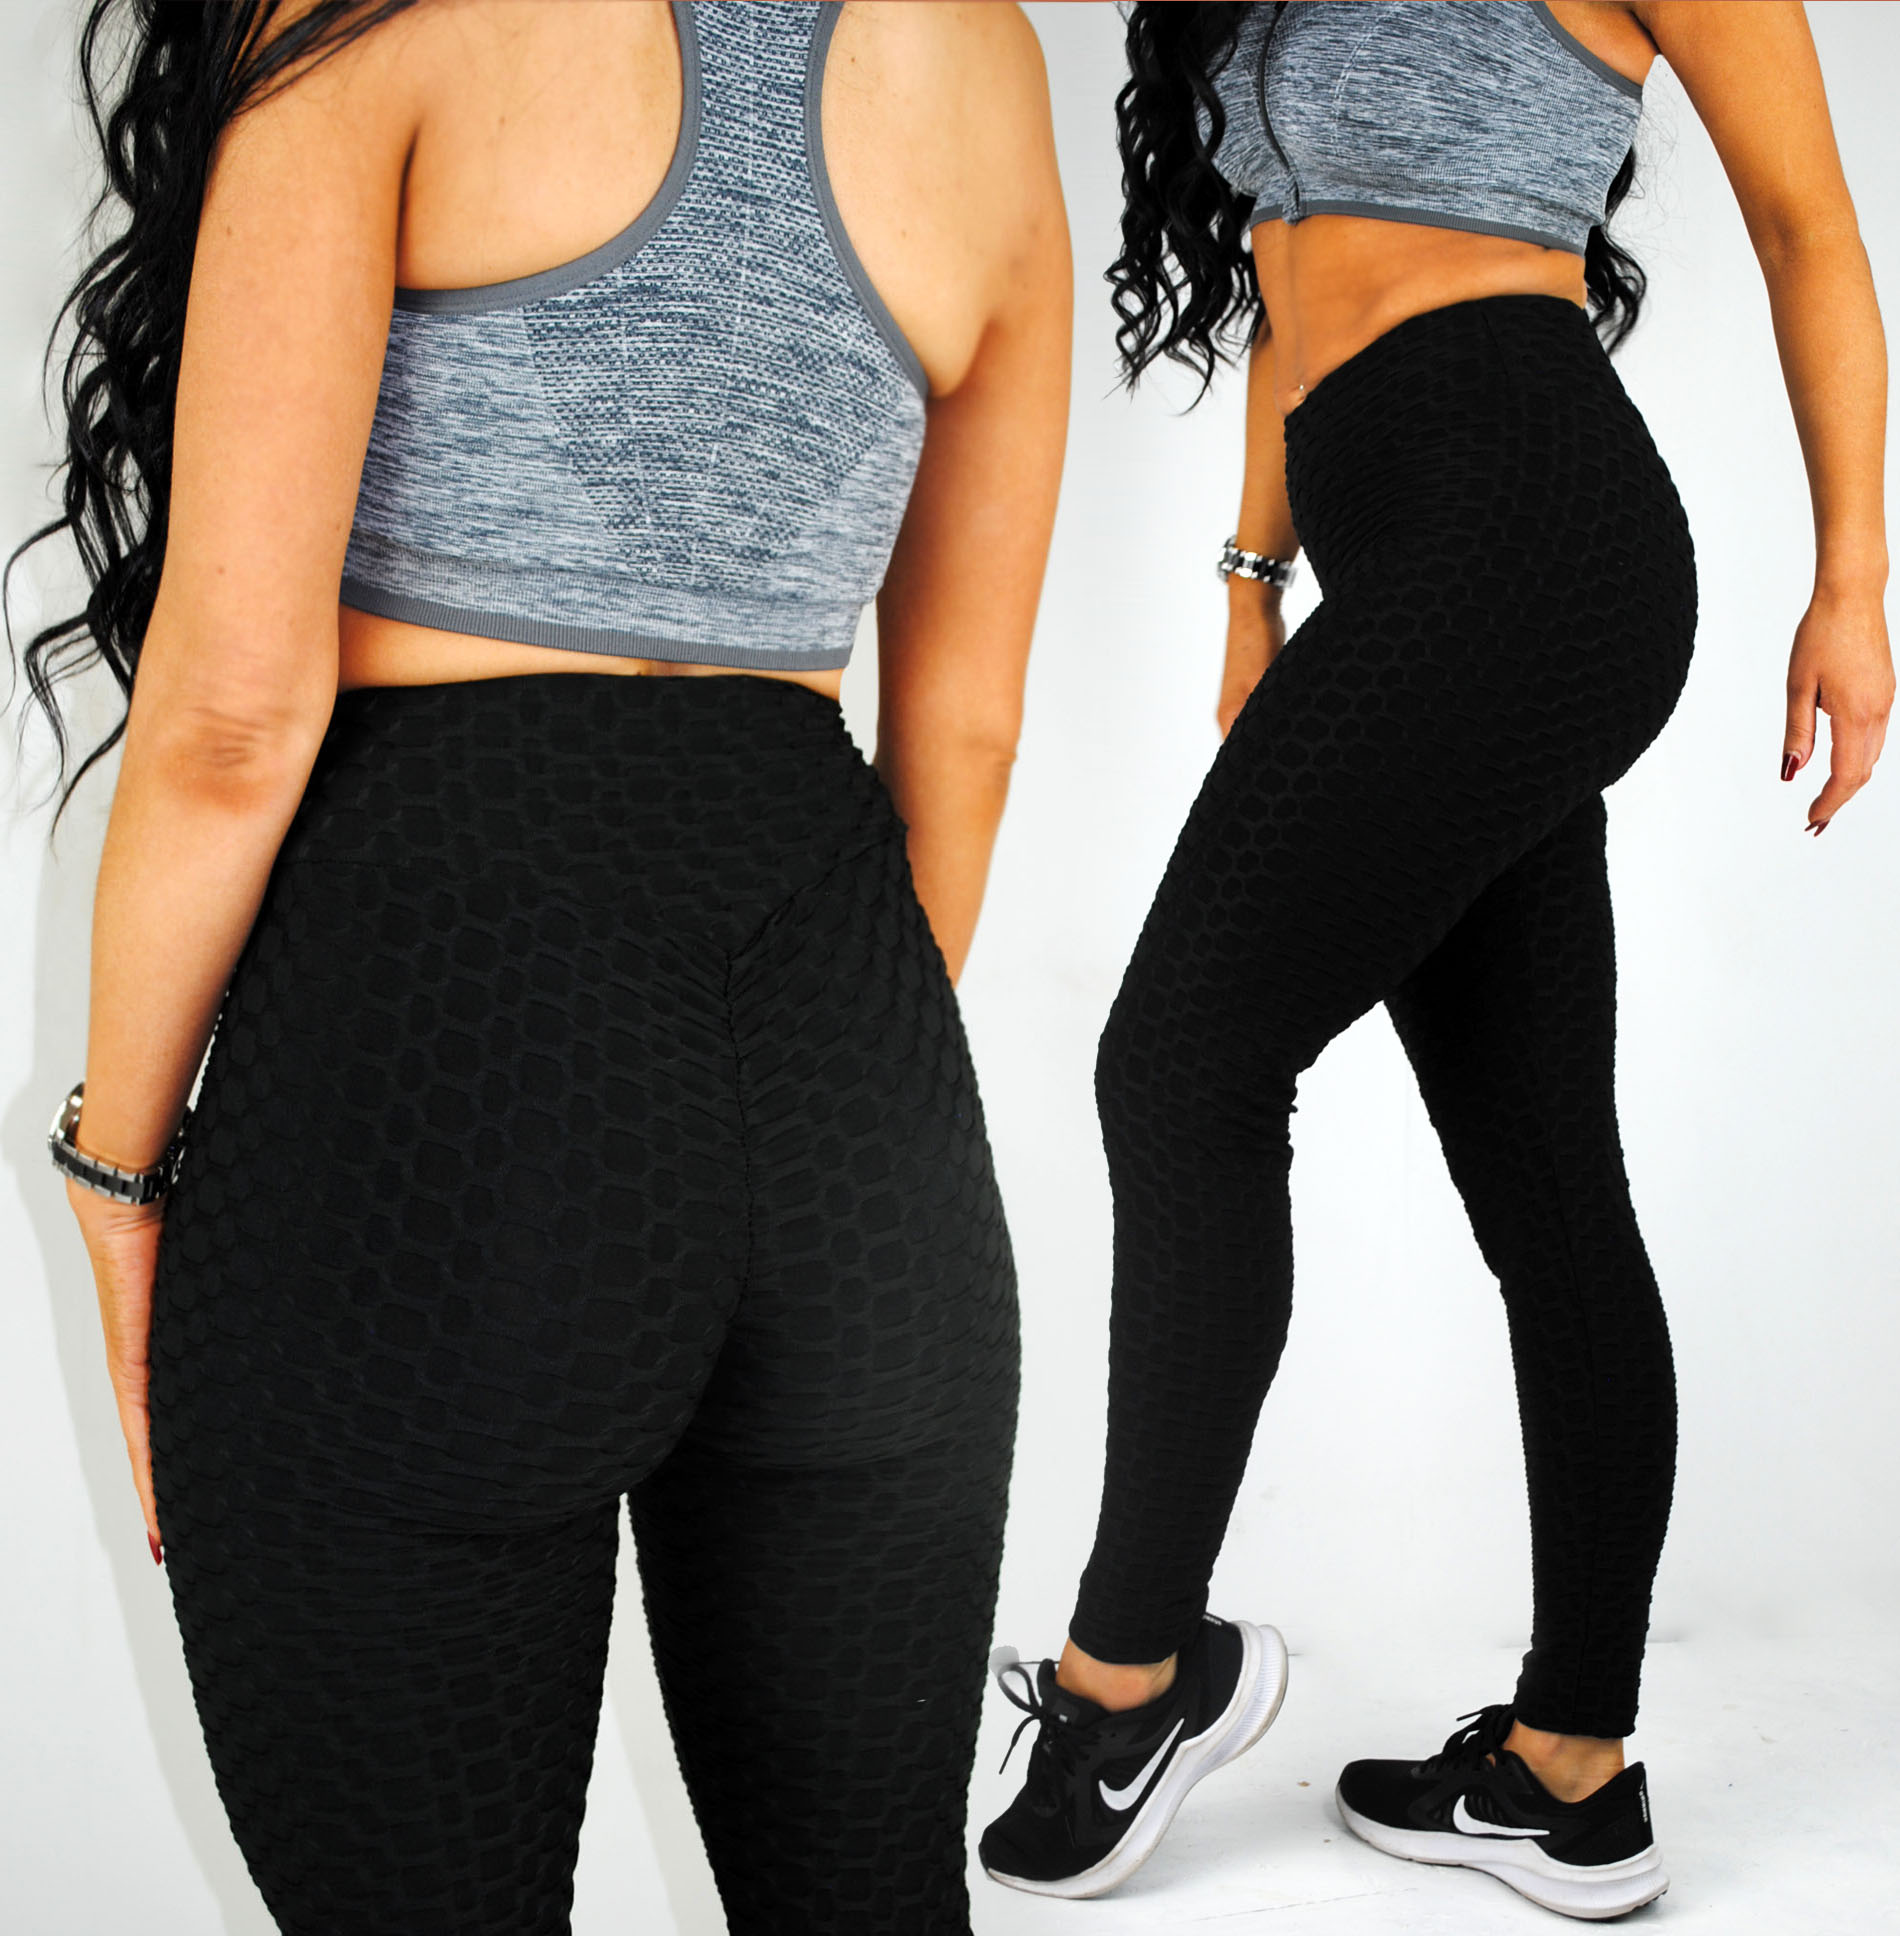 We tried TikTok's famous leggings that make your bum look big | The  Independent